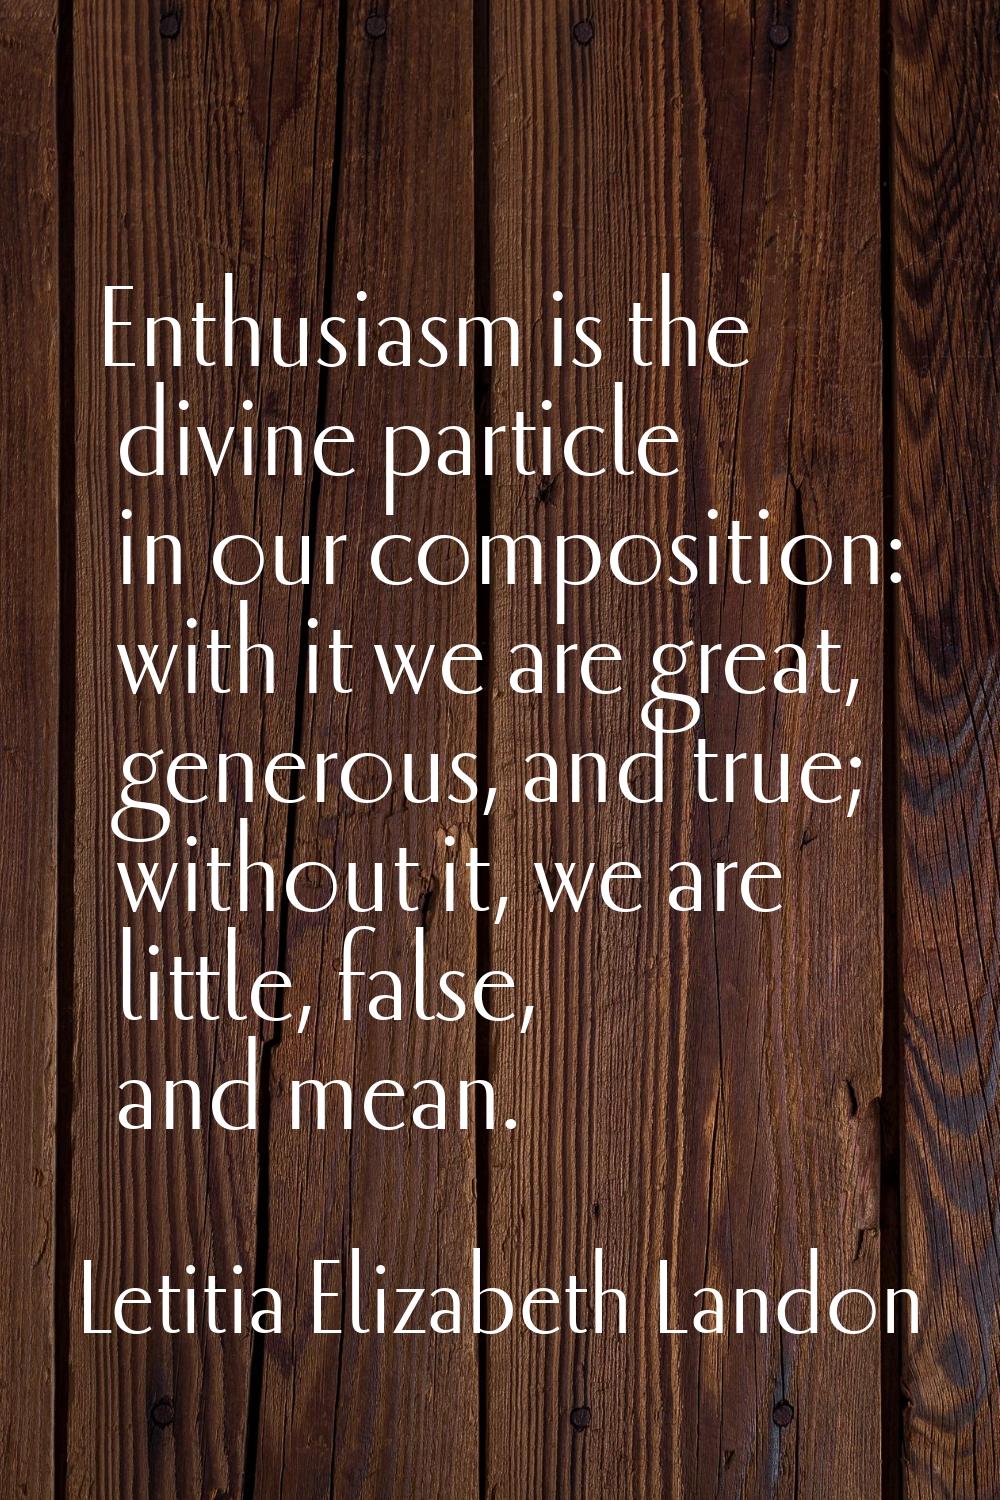 Enthusiasm is the divine particle in our composition: with it we are great, generous, and true; wit